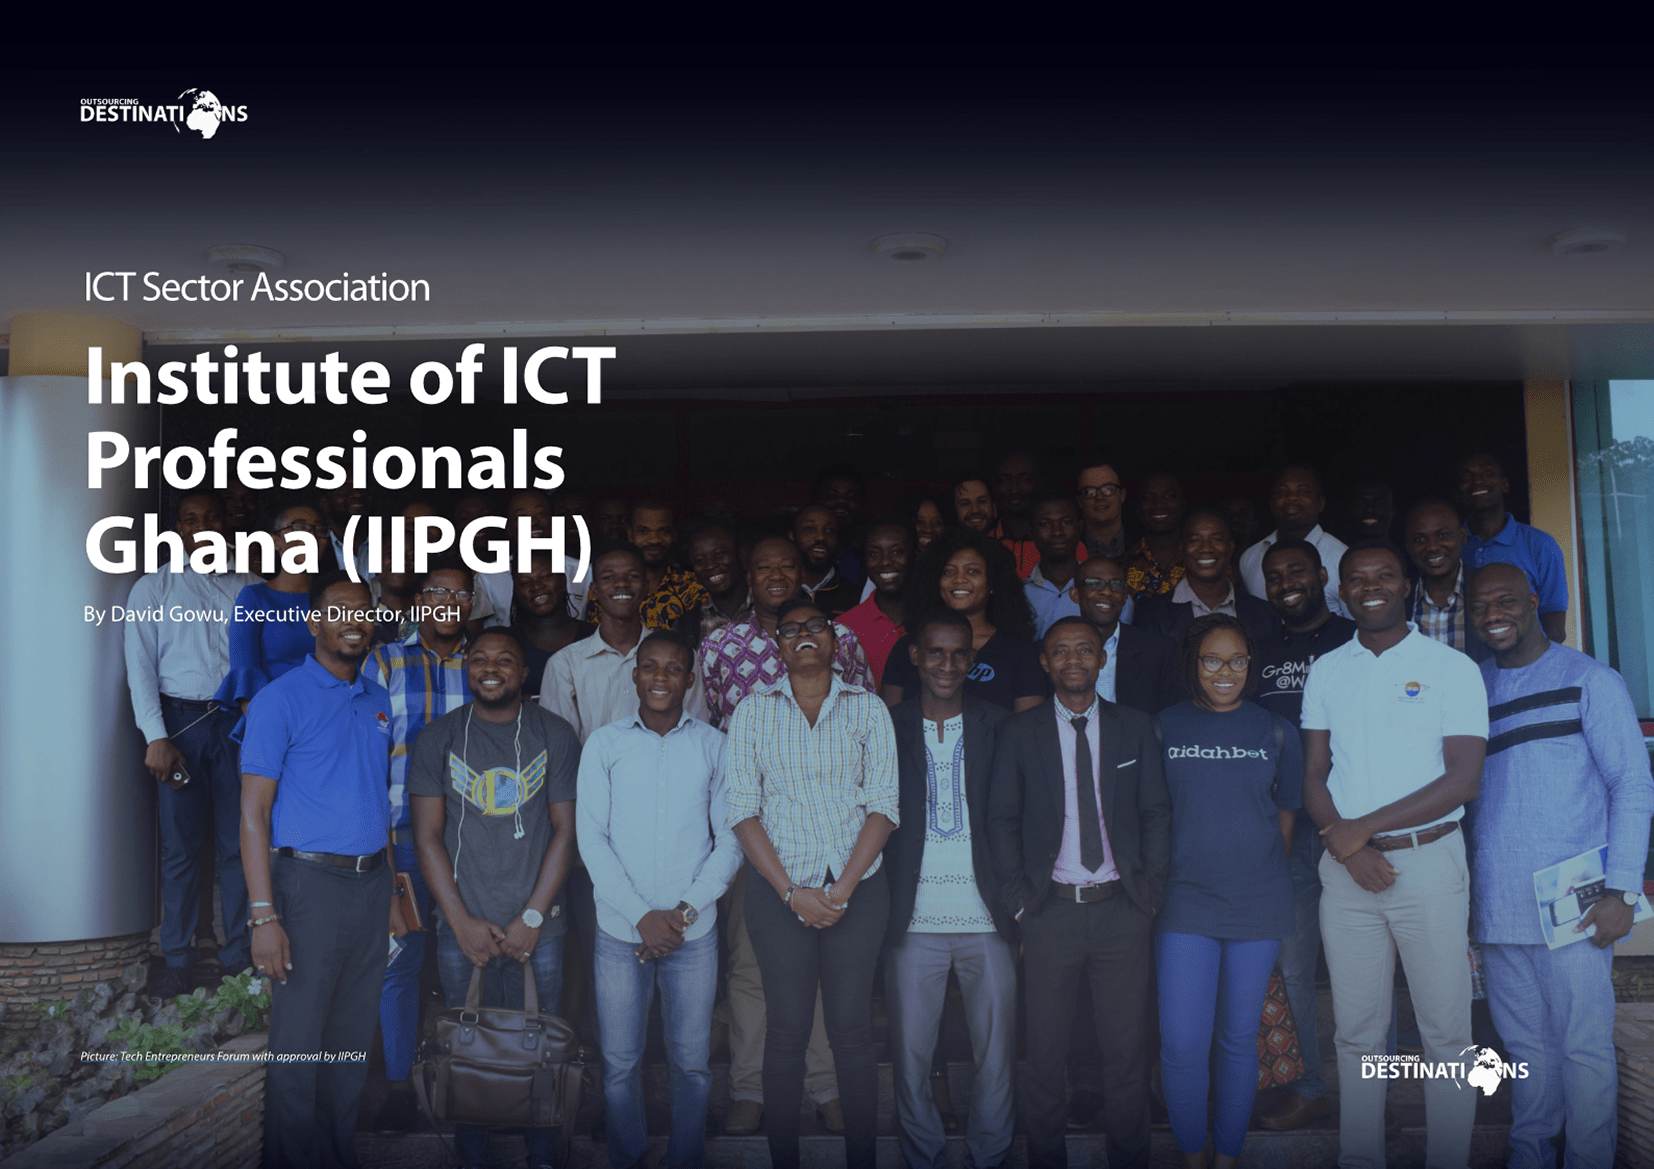 The Institute of ICT Professionals Ghana (IIPGH) – an ICT Sector Association